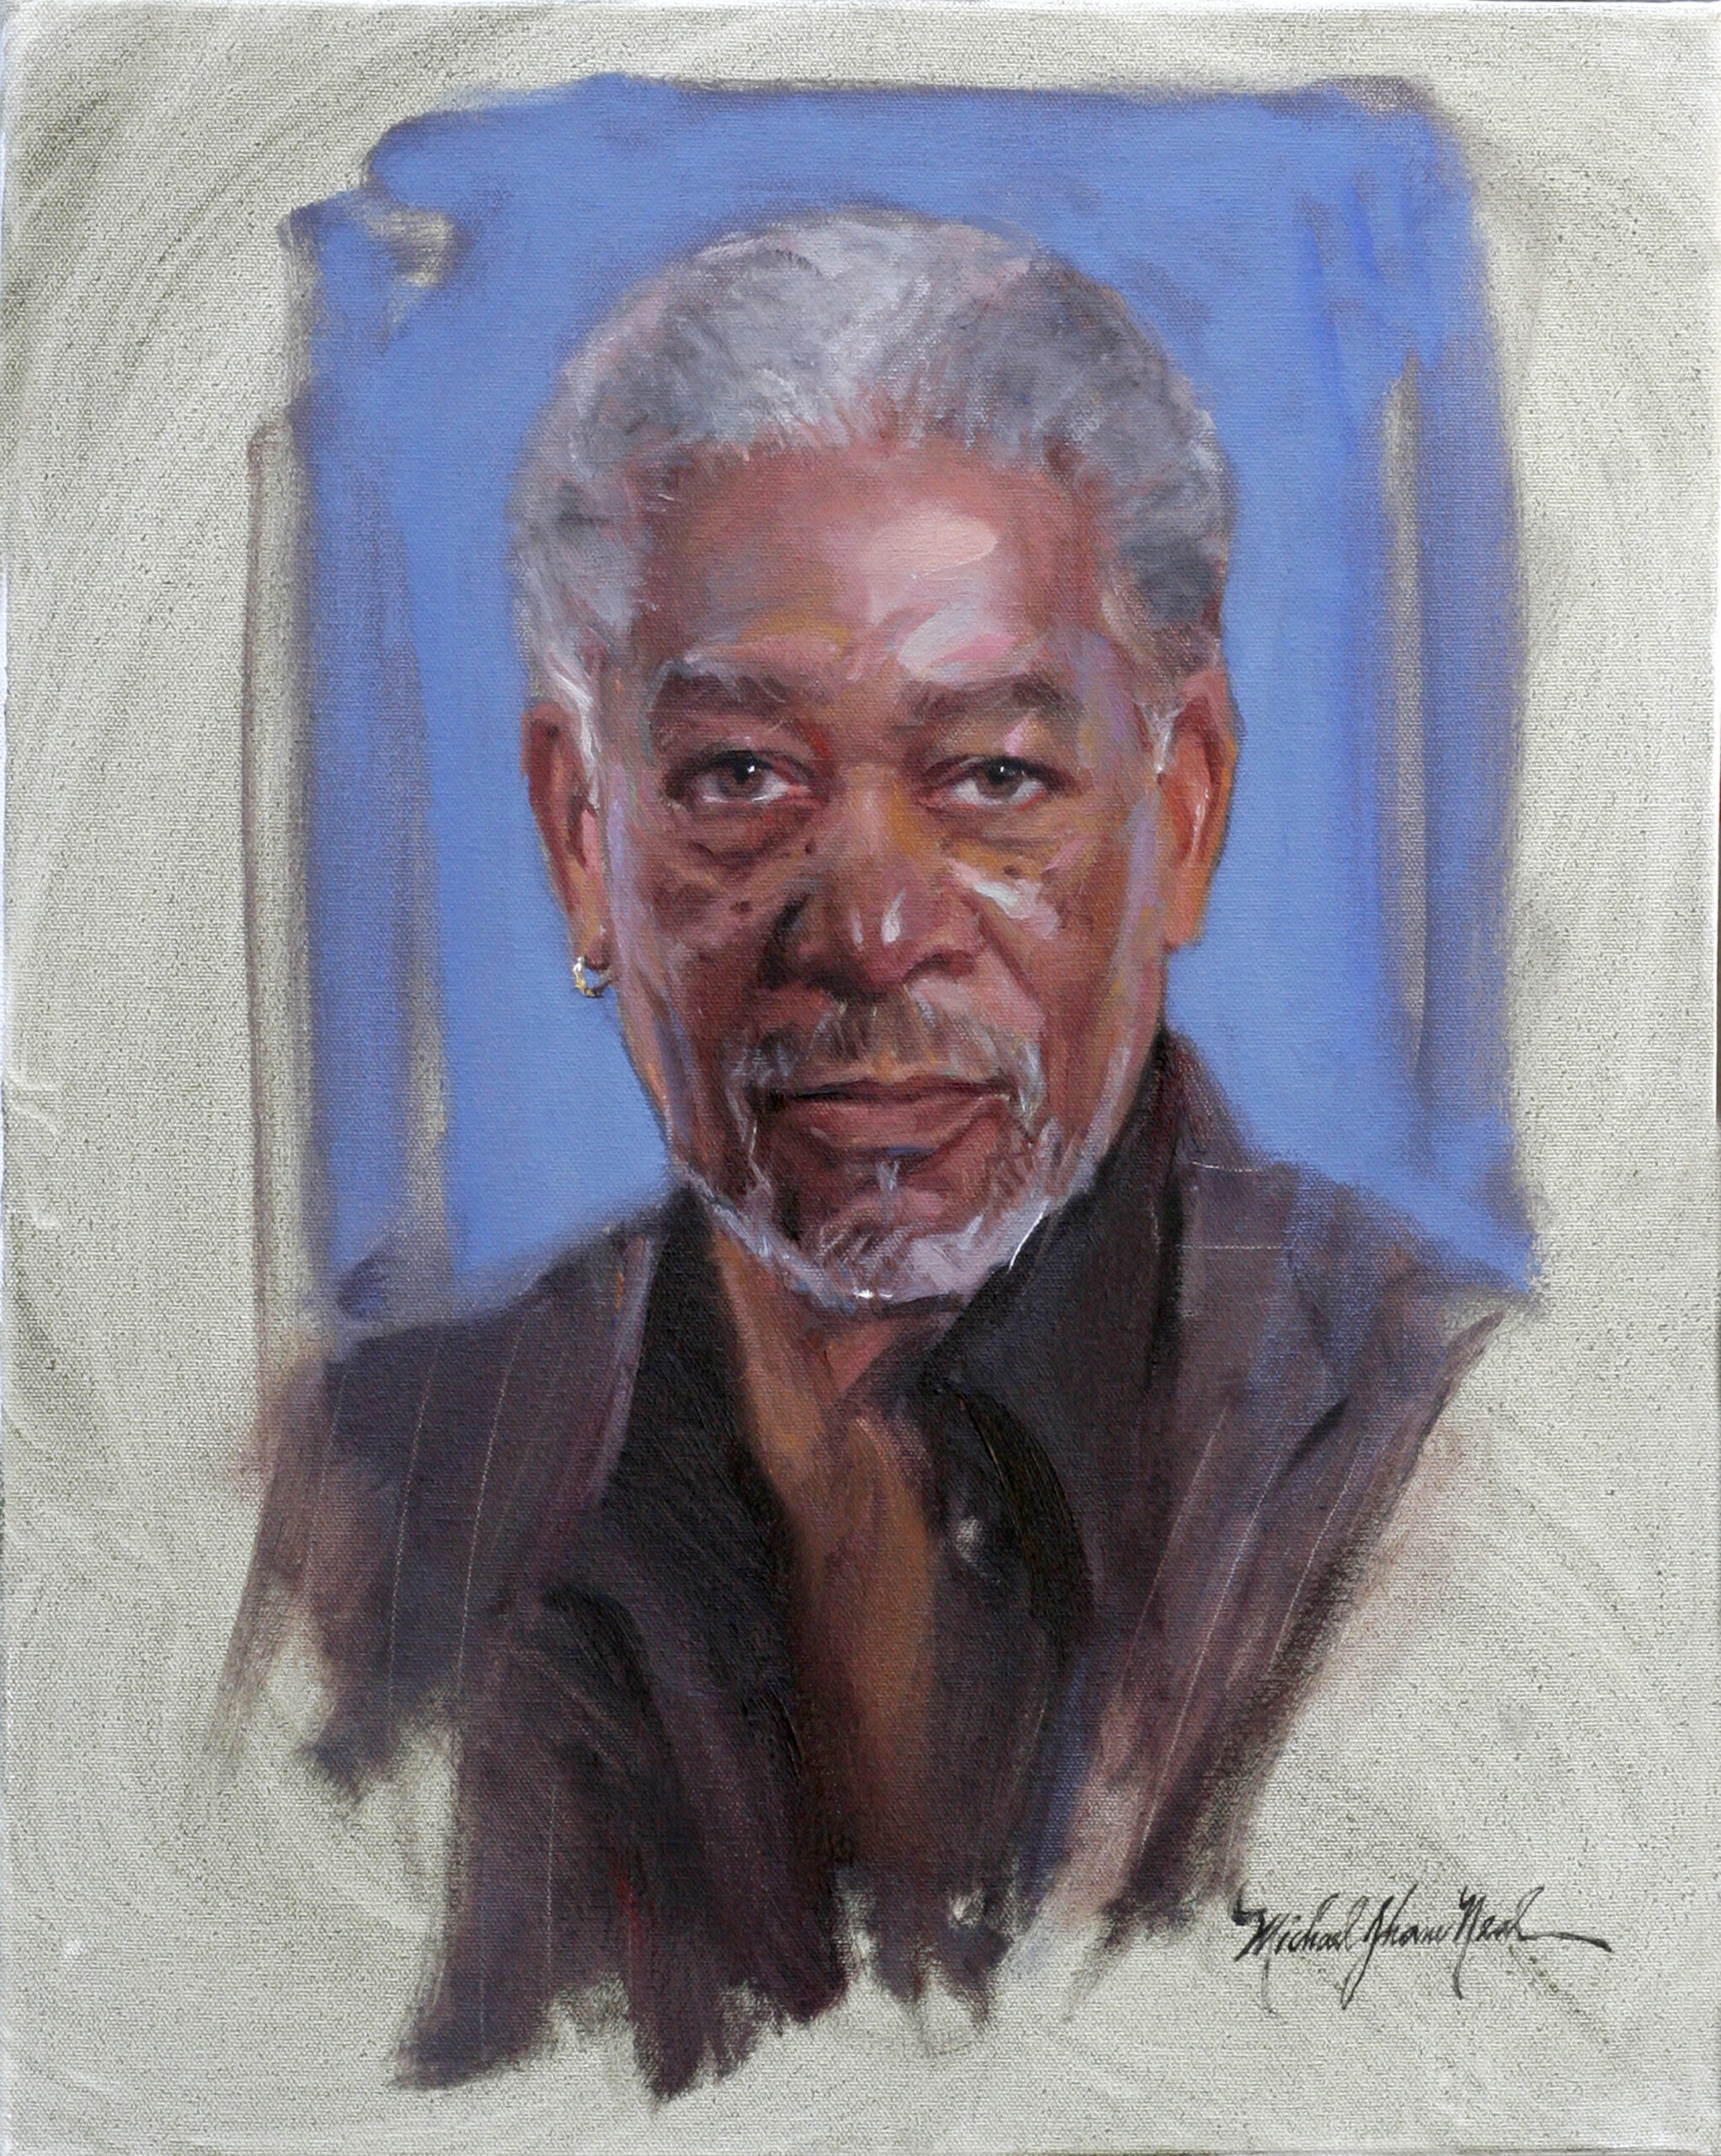 Morgan Freeman, The Players Club, New York, NY, 16" x 20", oil on canvas, by Michael Shane Neal